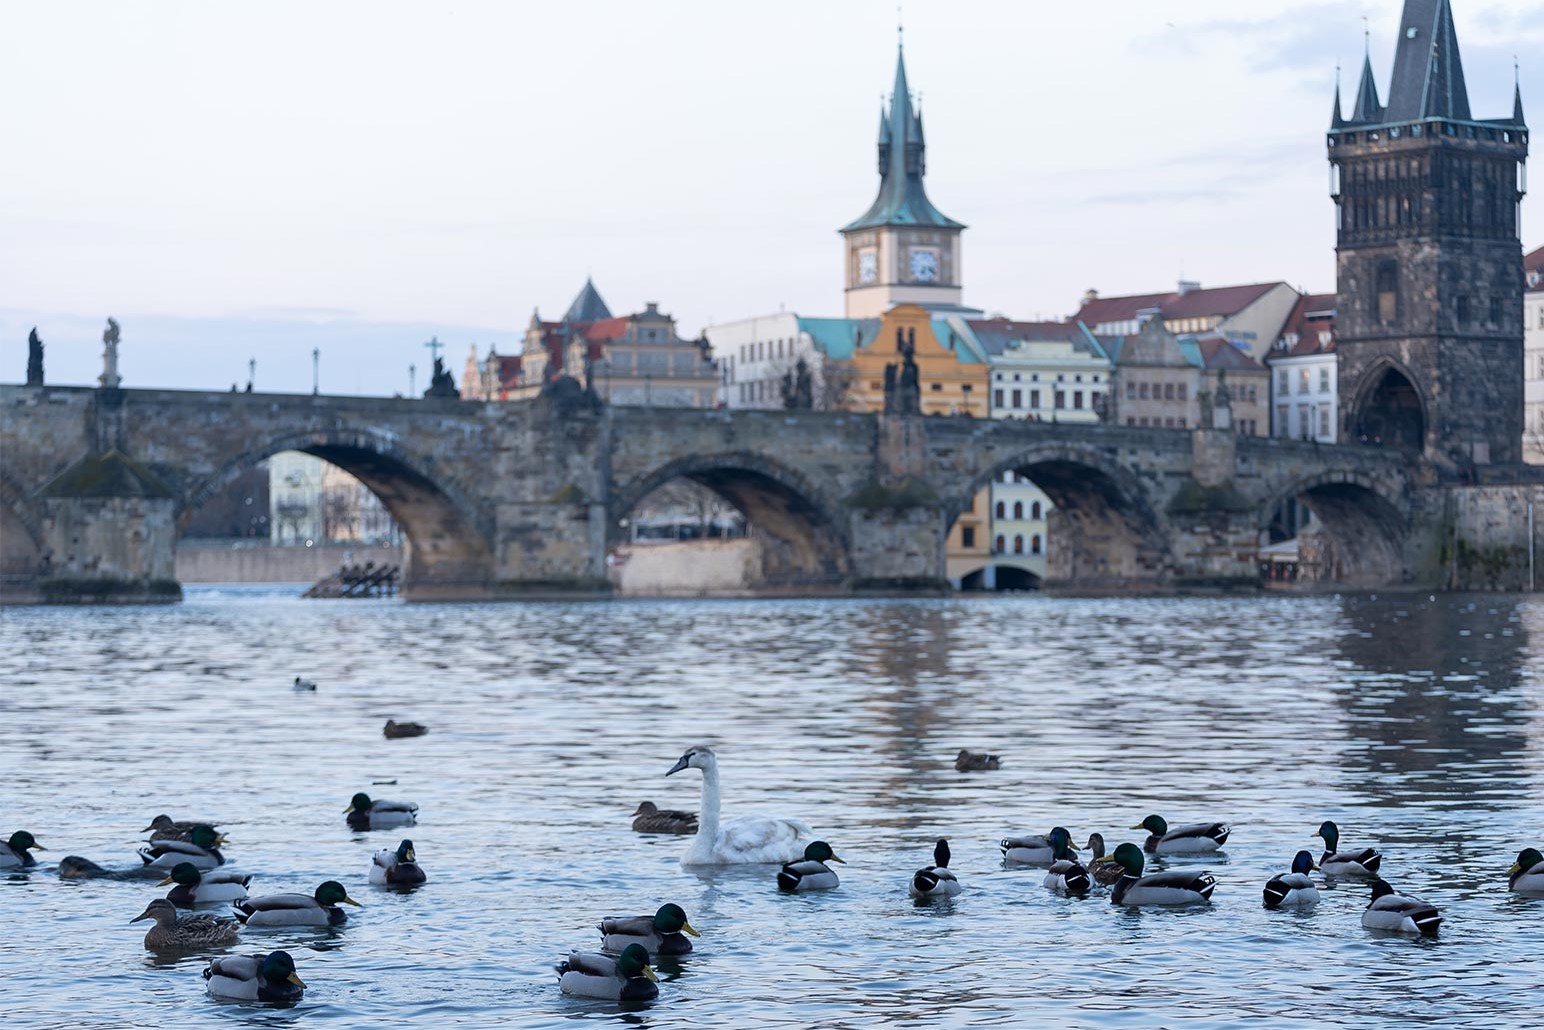 View of the stone Charles Bridge on the Vltava River in the center of Prague